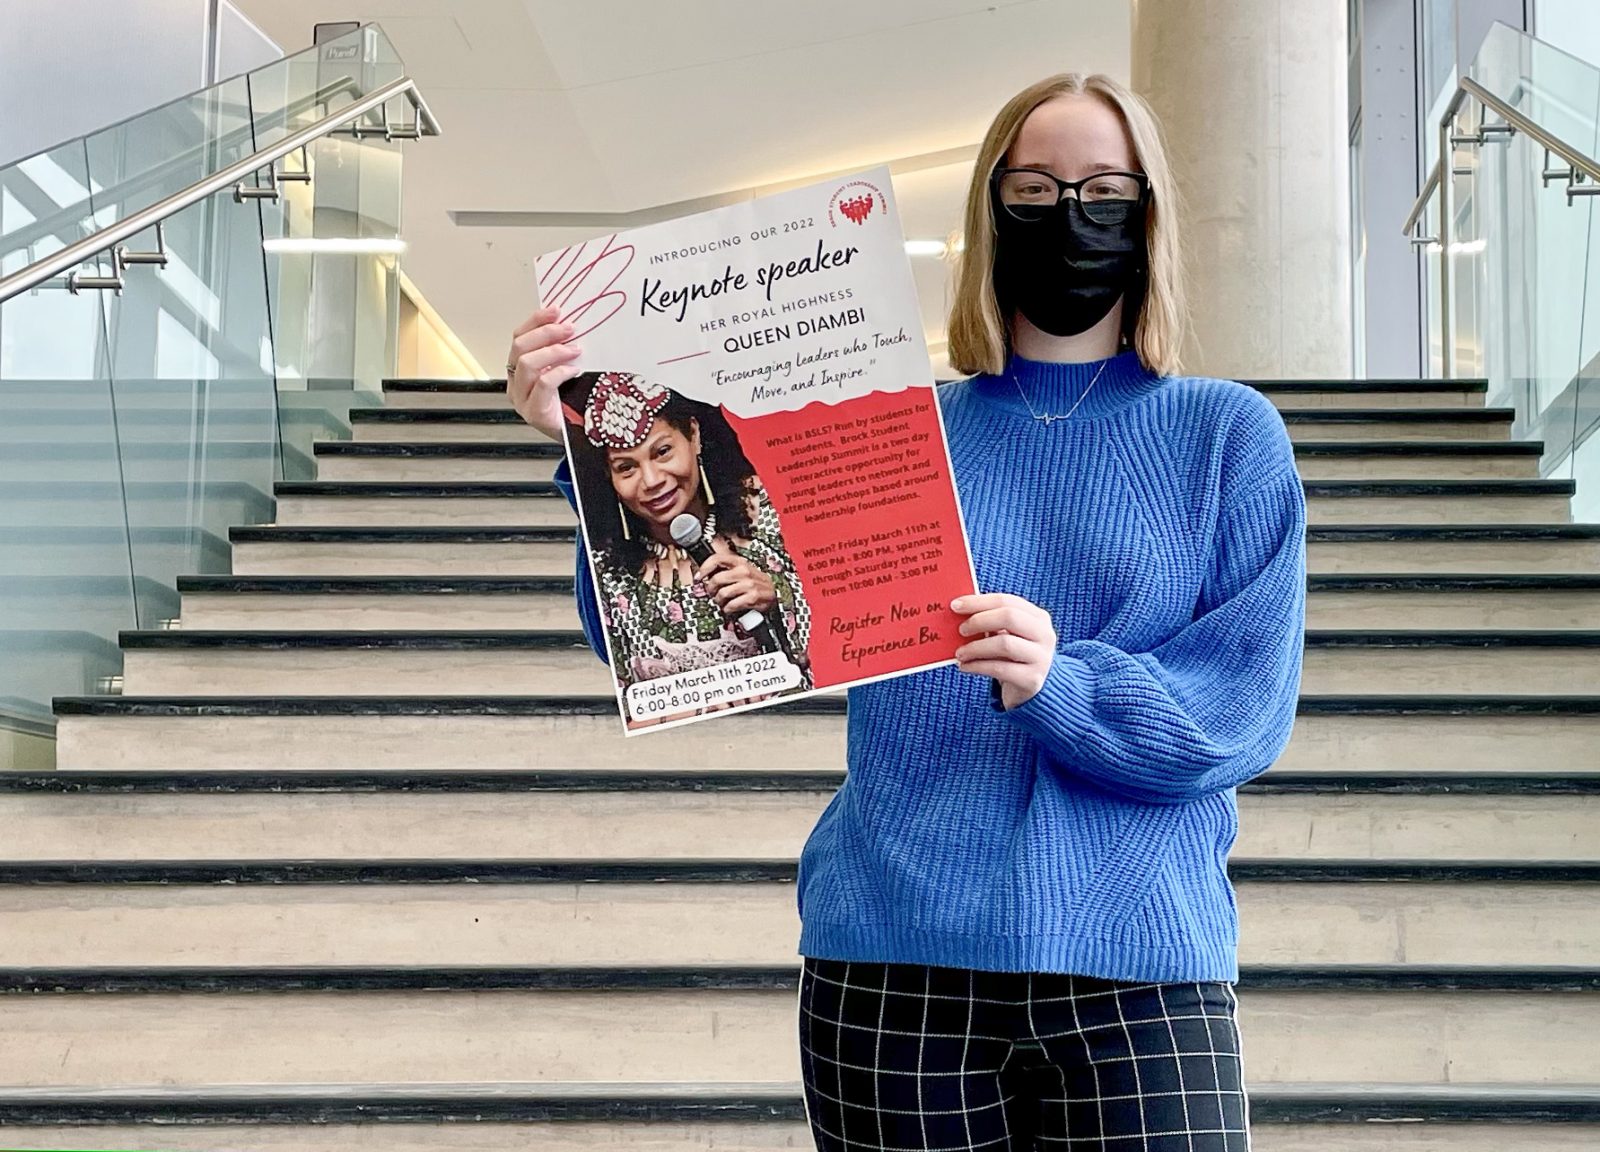 A masked woman in a blue sweater stands on a staircase while holding a poster that features information about Queen Diambi of the Democratic Republic of the Congo, who is pictured on the poster holding a microphone.